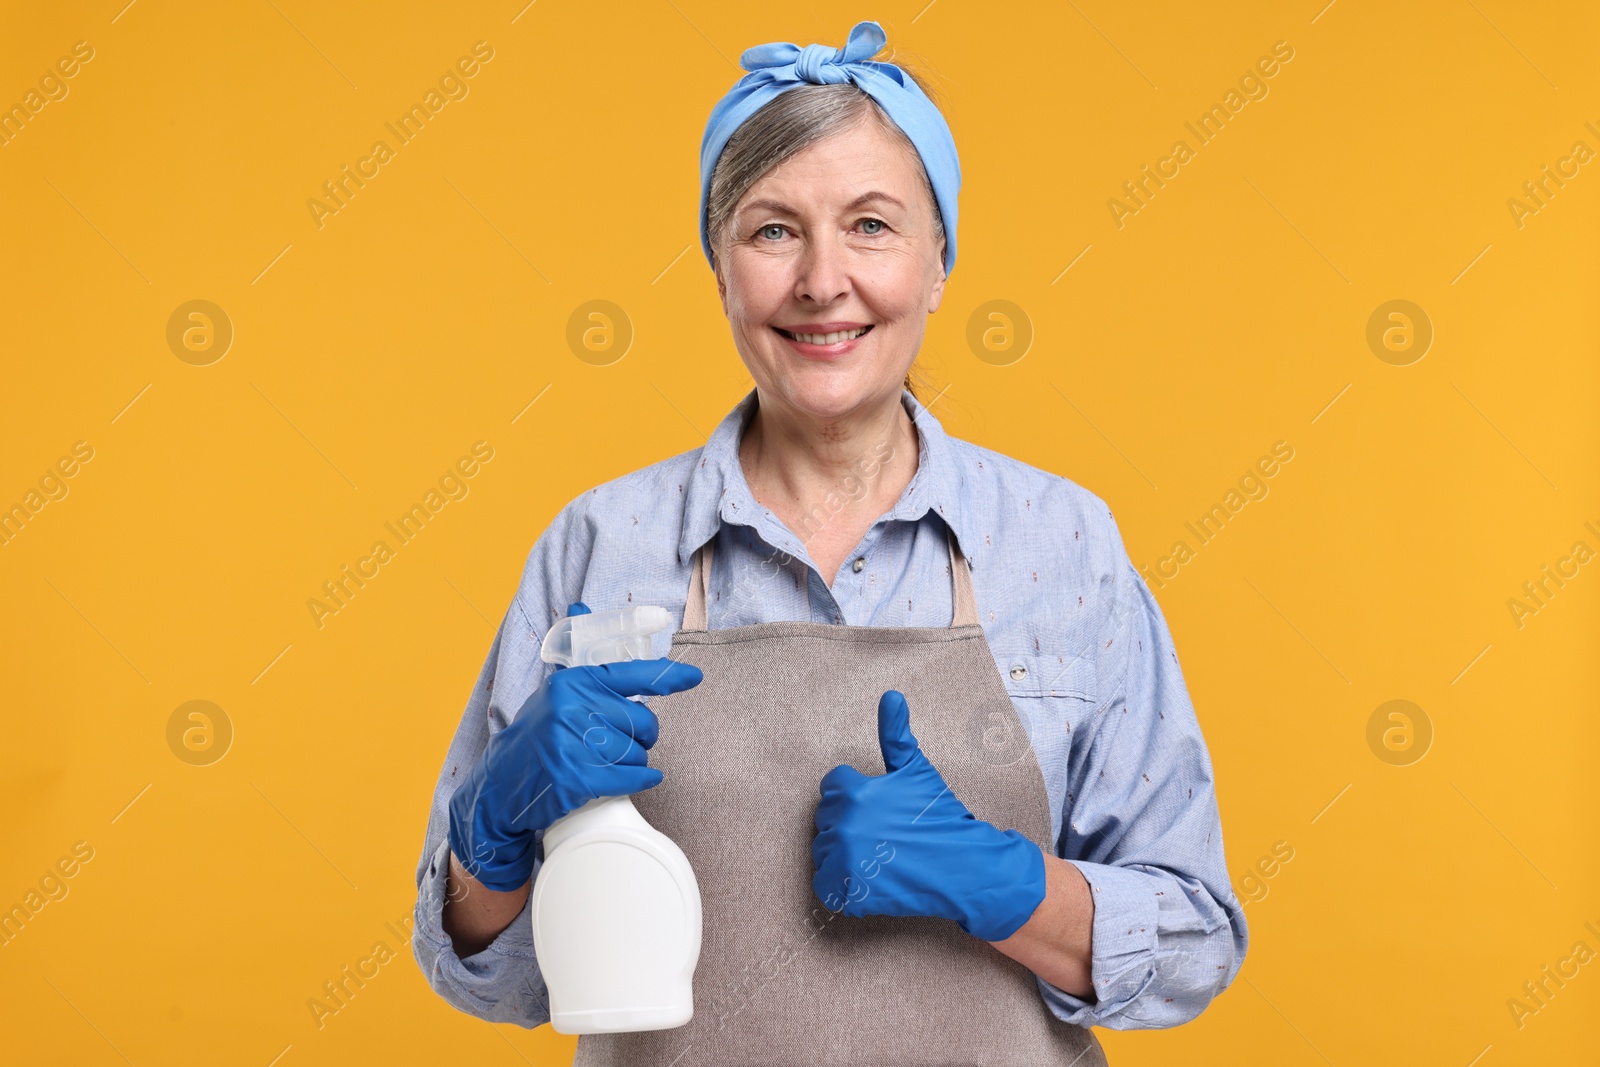 Photo of Happy housewife with spray bottle showing thumbs up on orange background